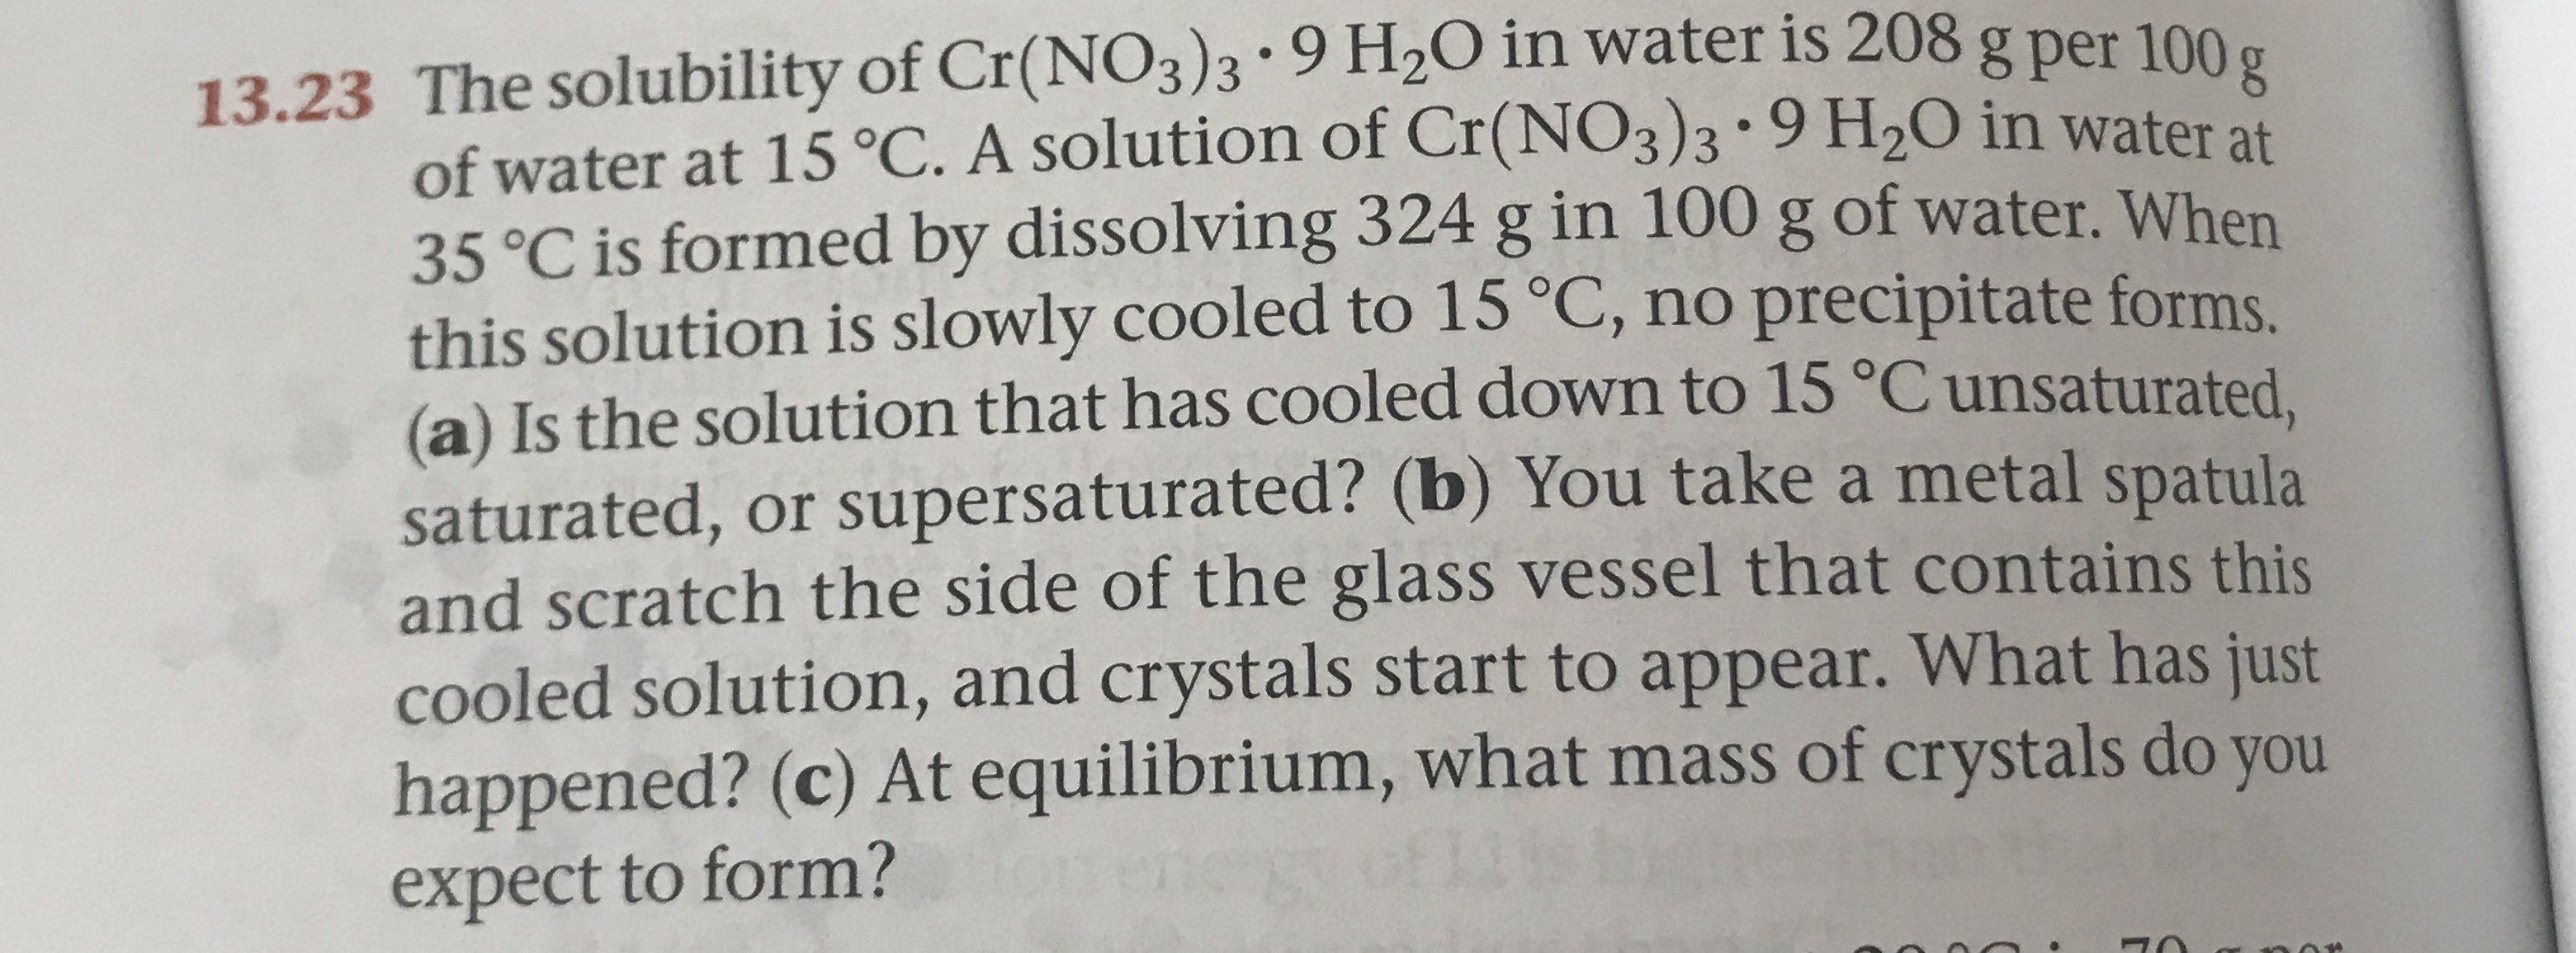 13.23 The solubility of Cr(NO3)3 . 9 H2O in water is 208g per 100
of water at 15 °C. A solution of Cr(NO3)3 * 9 H20 in water at
35°C is formed by dissolving 324 g in 100 g of water. When
this solution is slowly cooled to 15 °C, no precipitate forms
(a) Is the solution that has cooled down to 15 °C unsaturated
saturated, or supersaturated? (b) You take a metal spatula
and scratch the side of the glass vessel that contains this
cooled solution, and crystals start to appear. What has just
happened? (c) At equilibrium, what mass of crystals do you
expect to form?
